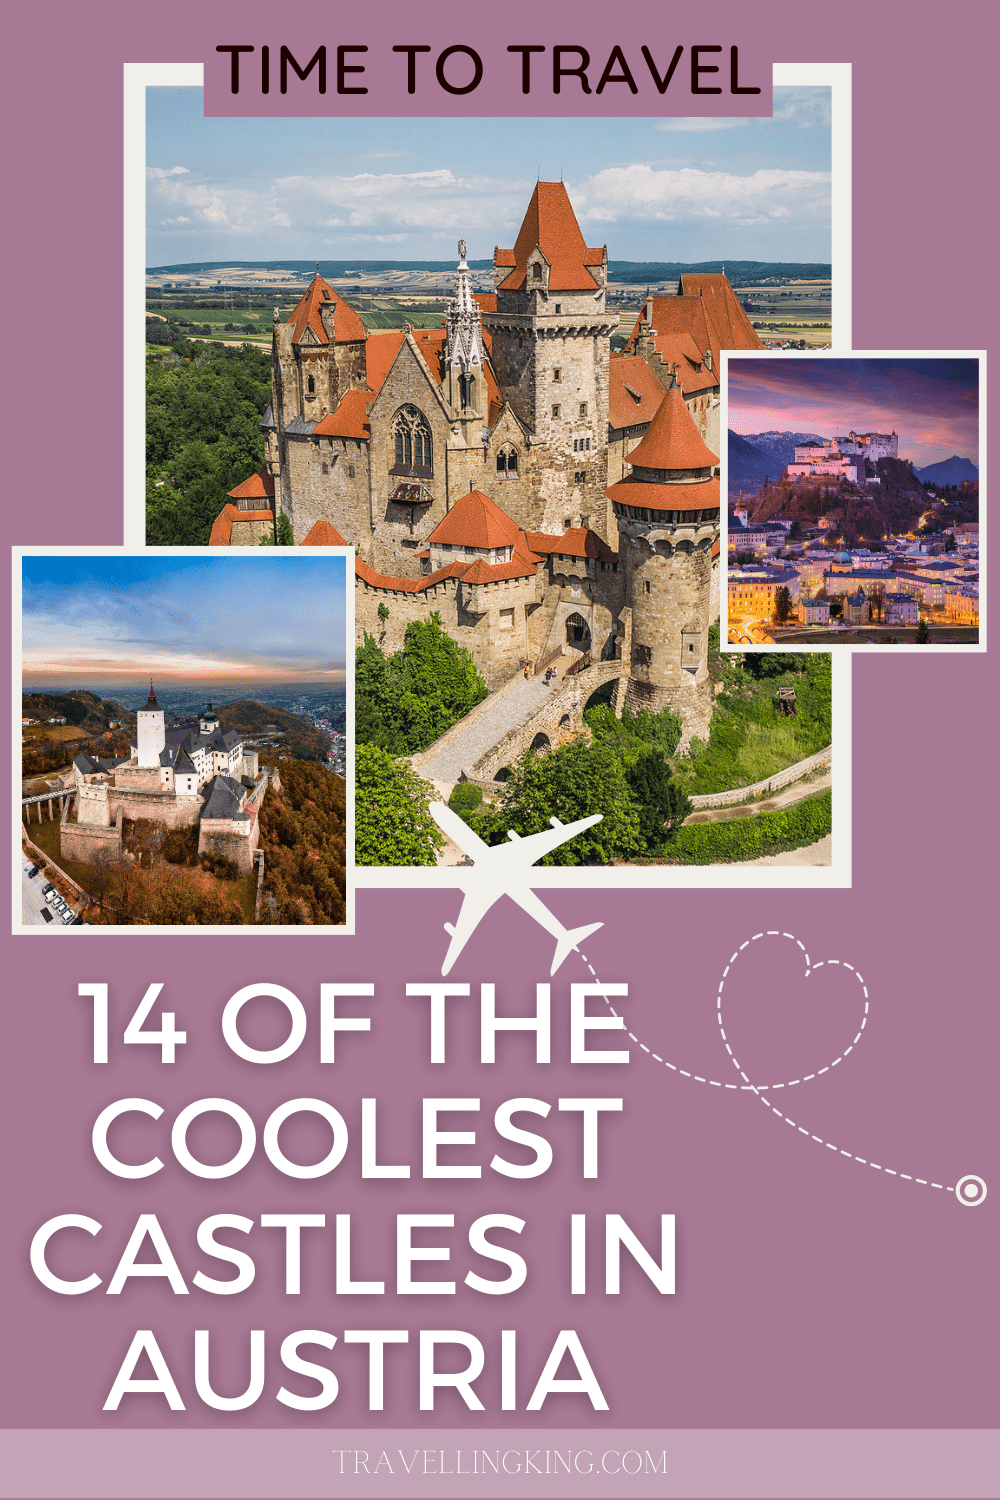 14 of the Coolest Castles in Austria